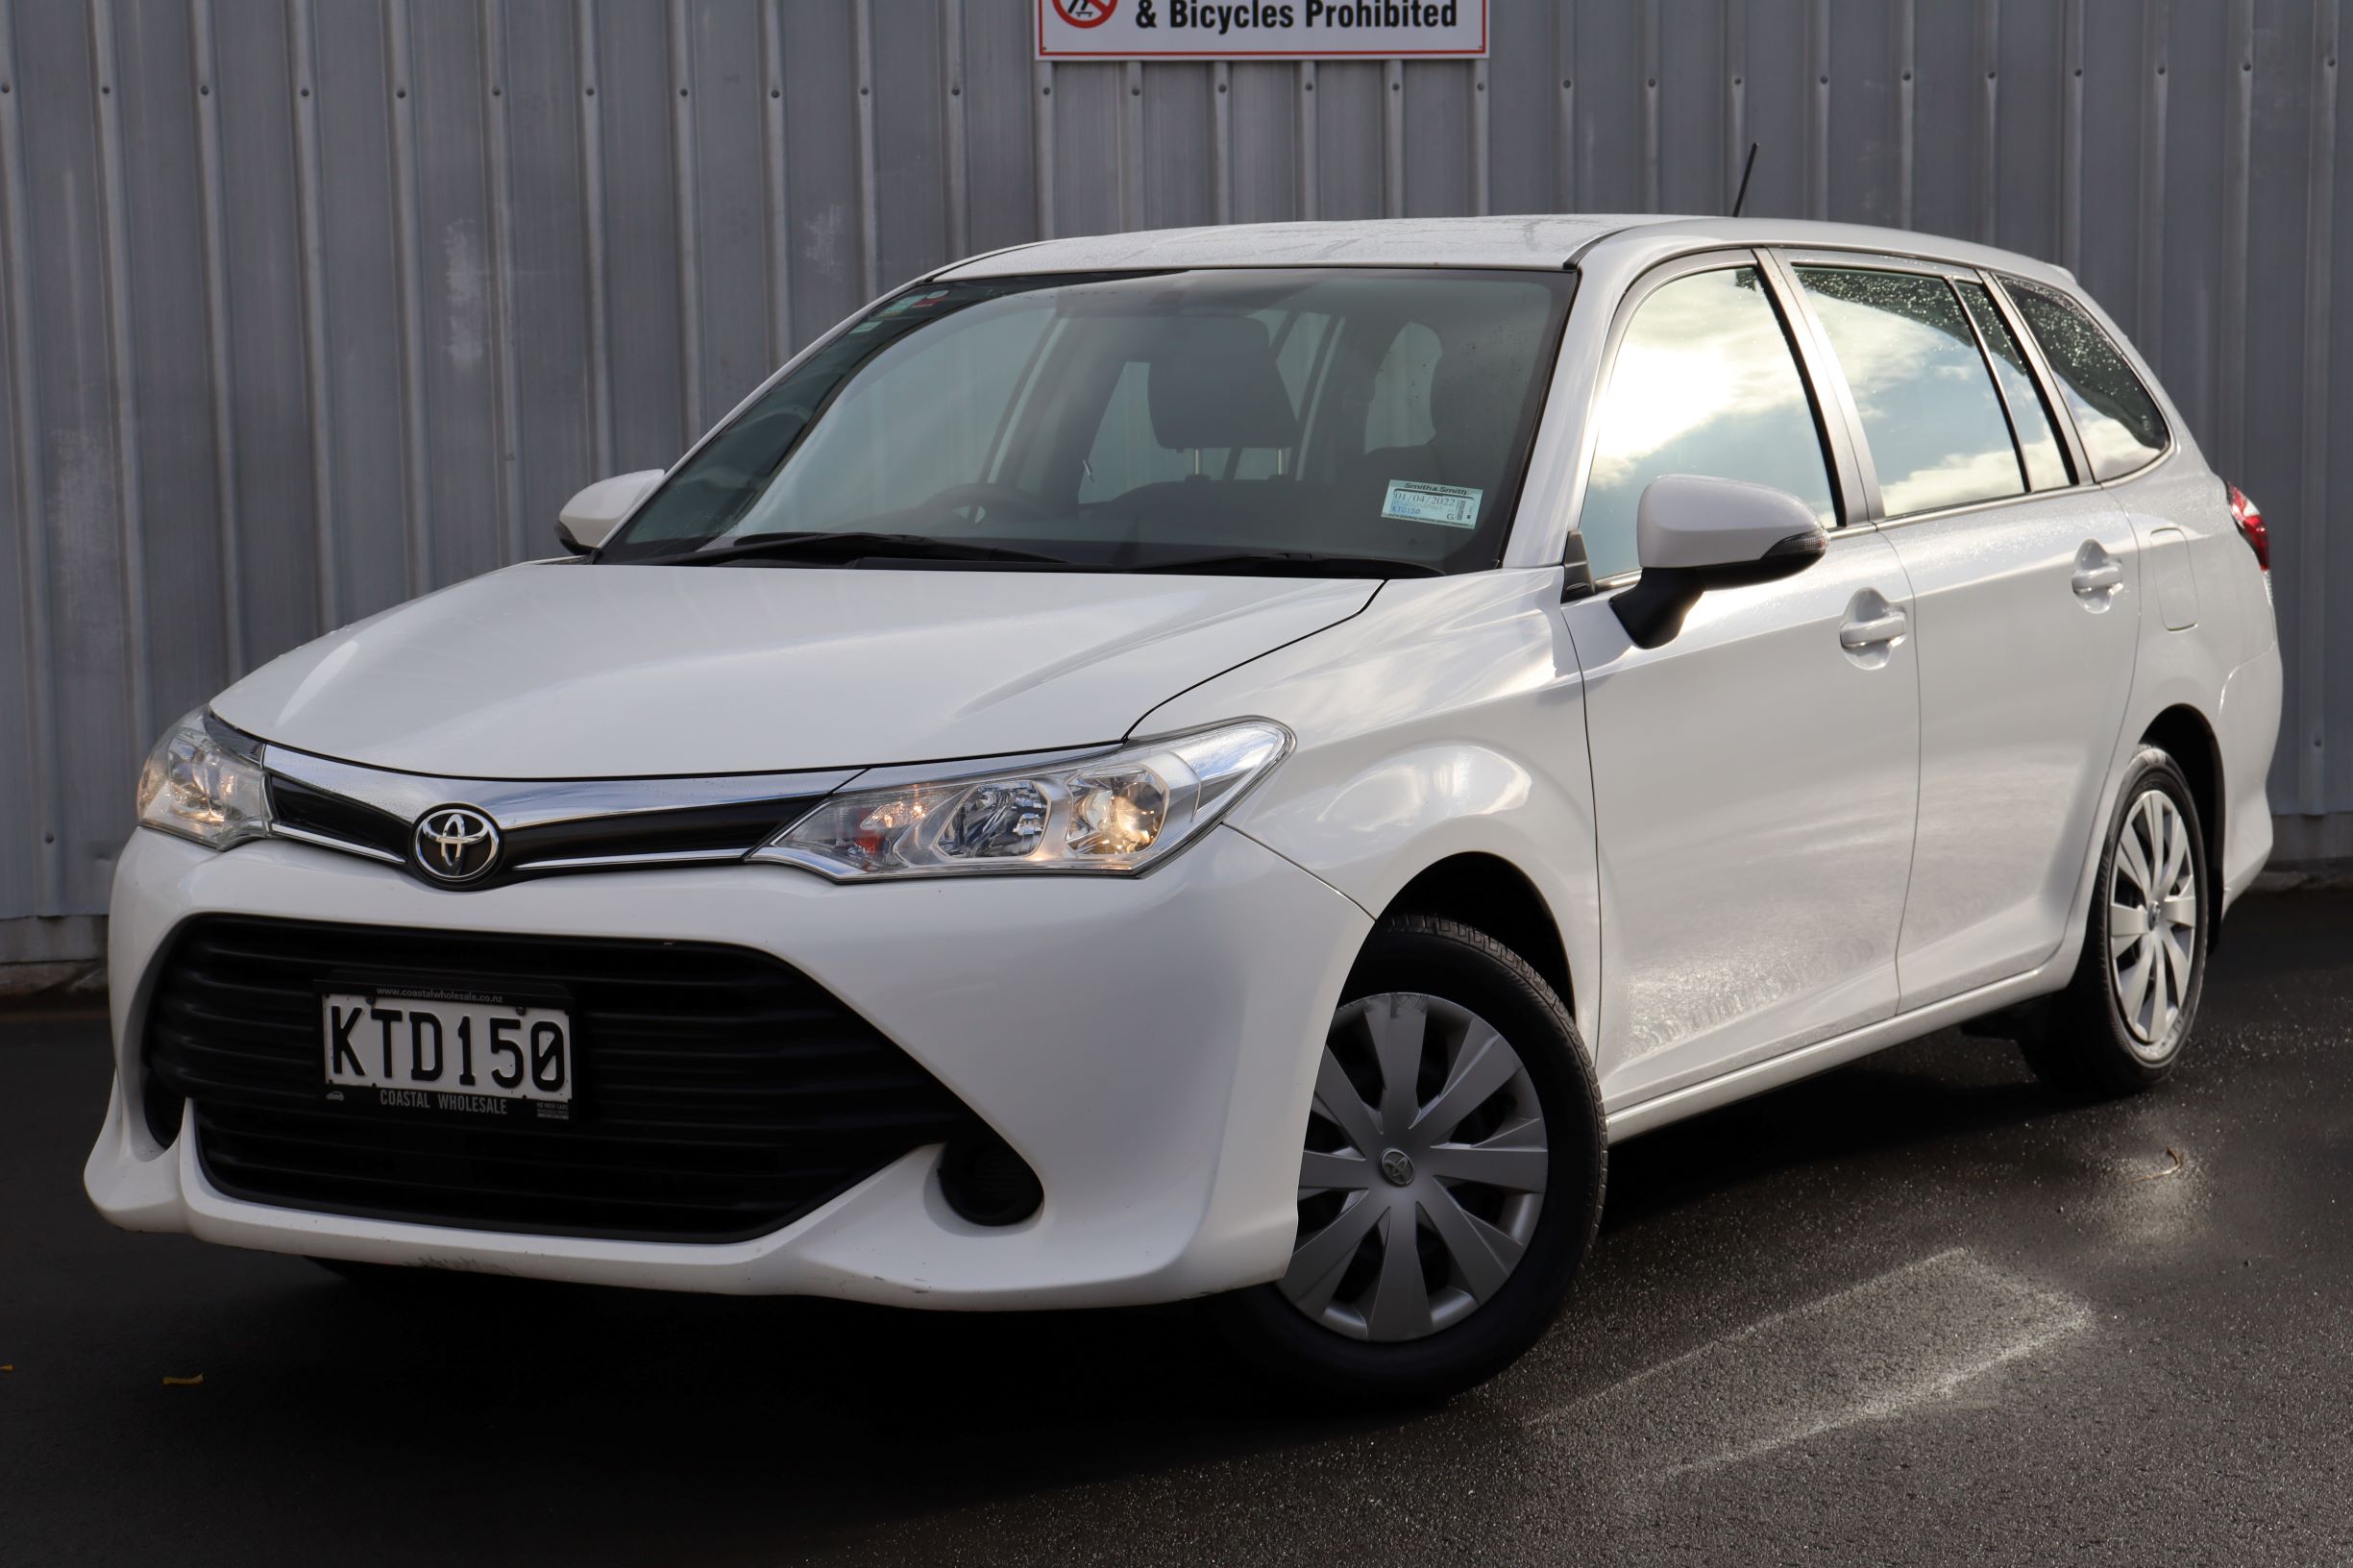 Toyota Corolla wagon 2017 for sale in Auckland